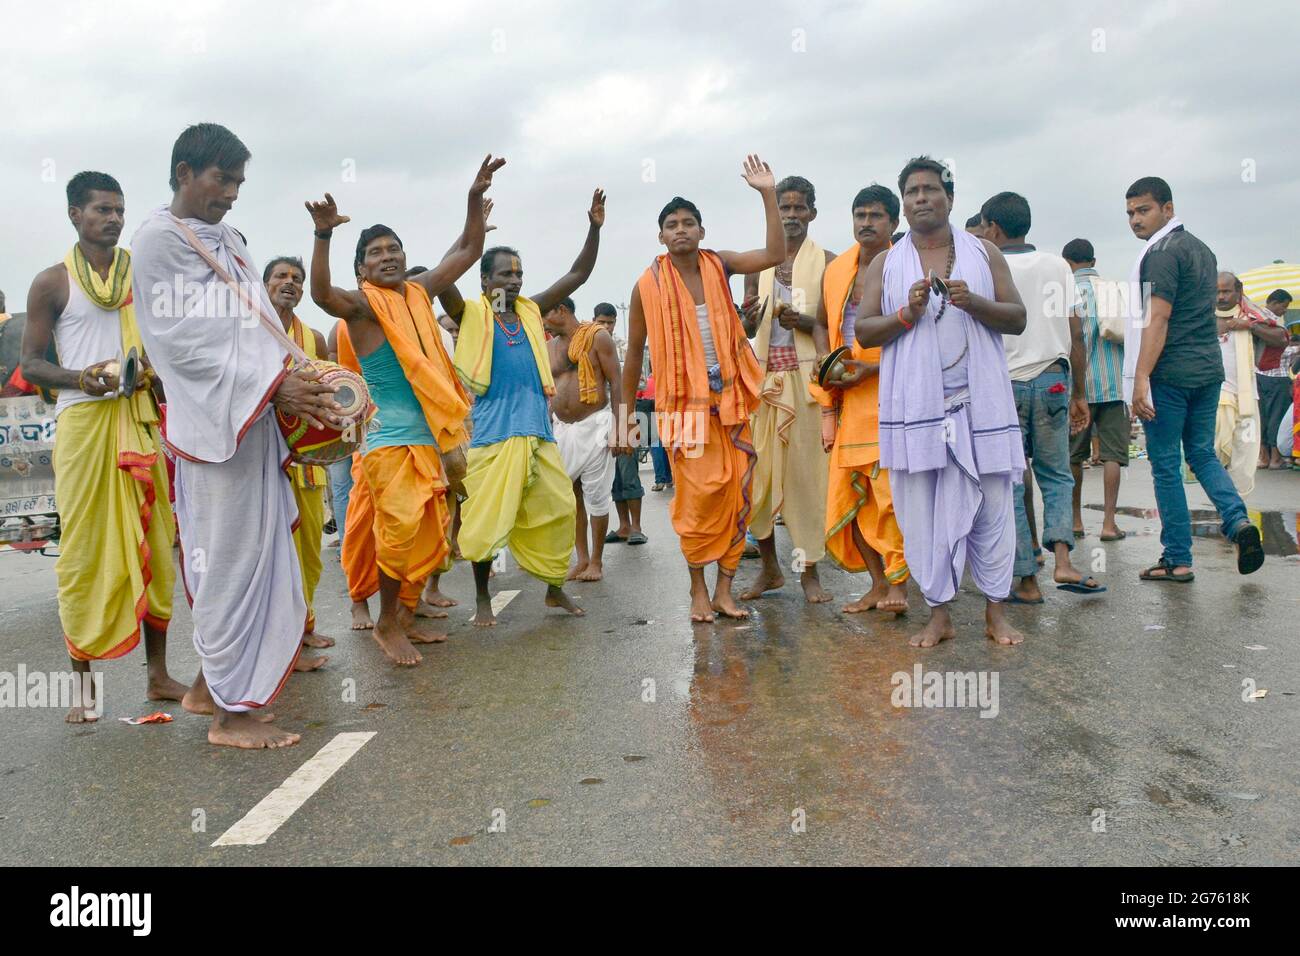 dance perform by devotees during ratha yatra festival Stock Photo